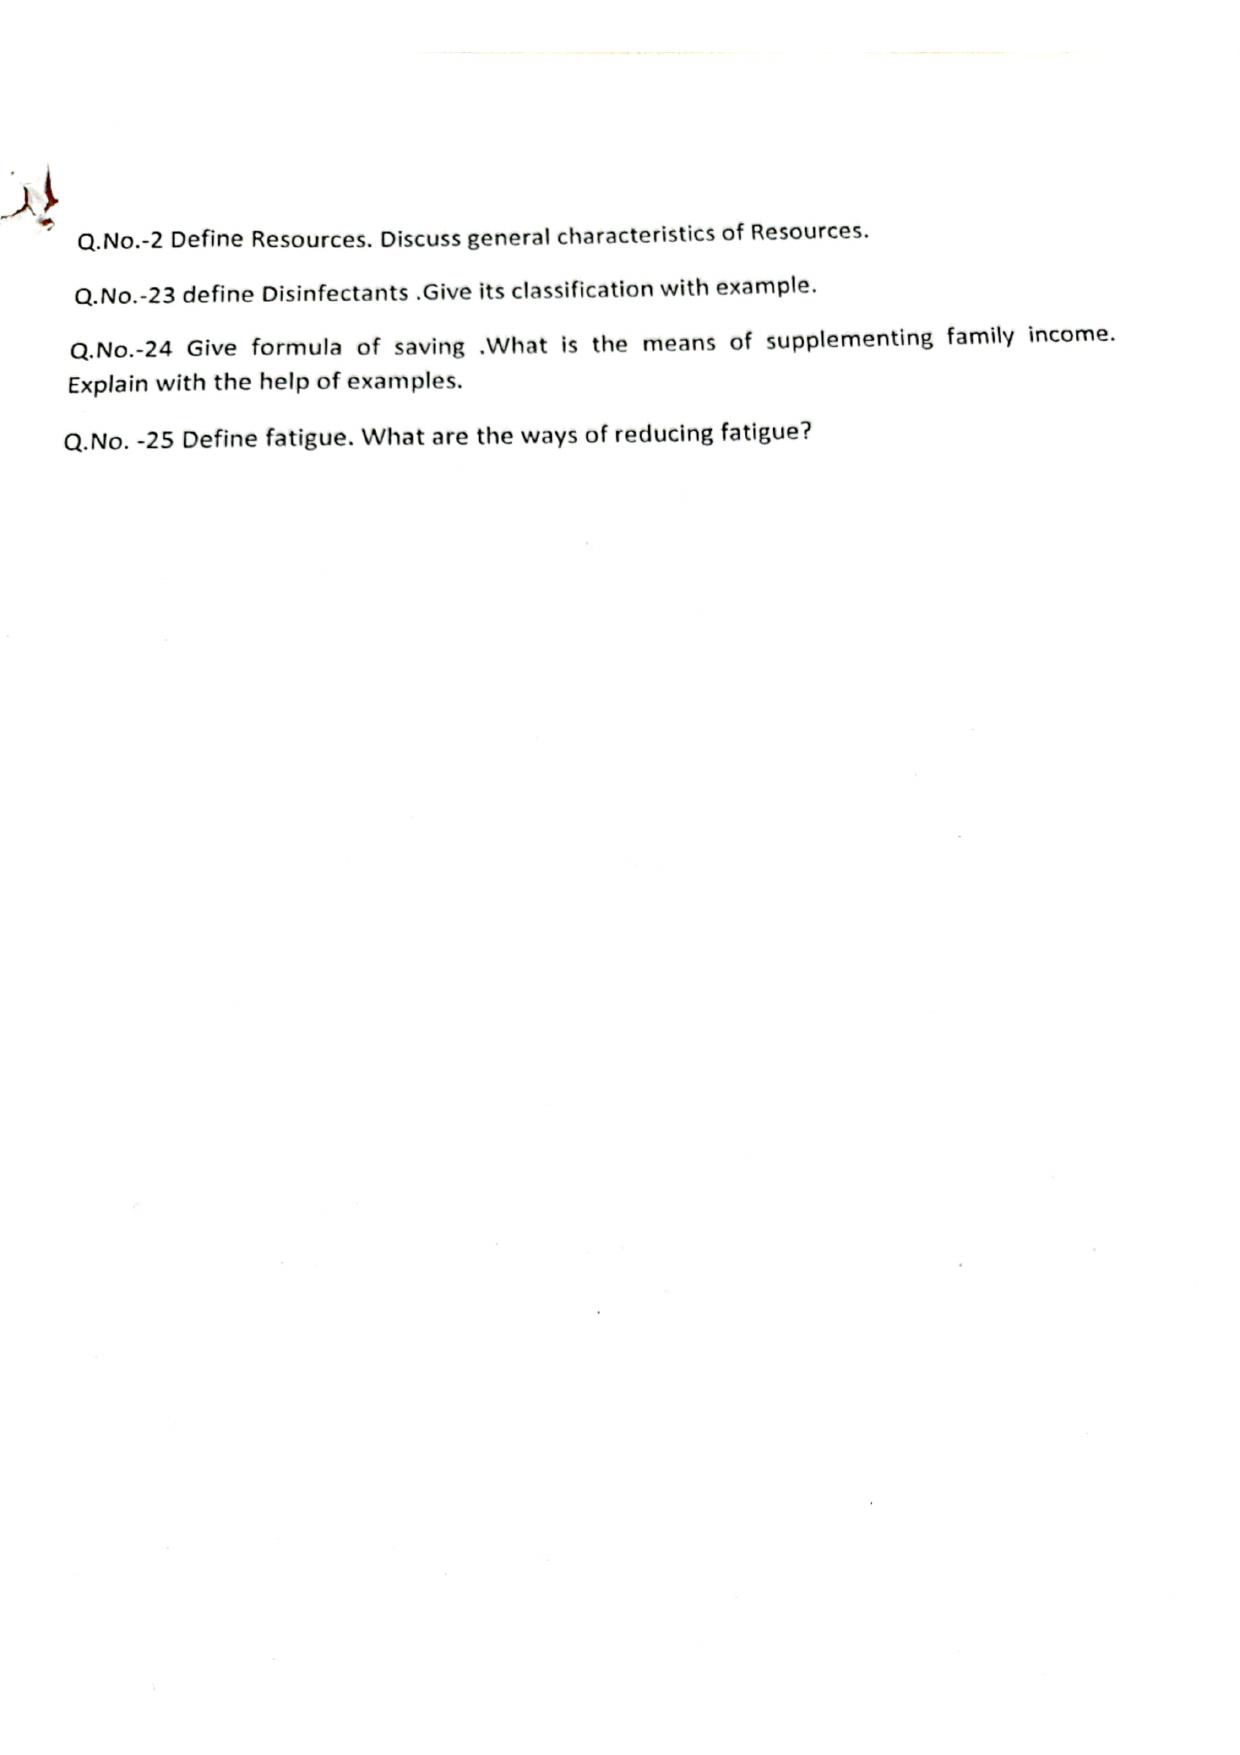 JKBOSE Class 11 Management of Resources Model Question Paper - Page 3